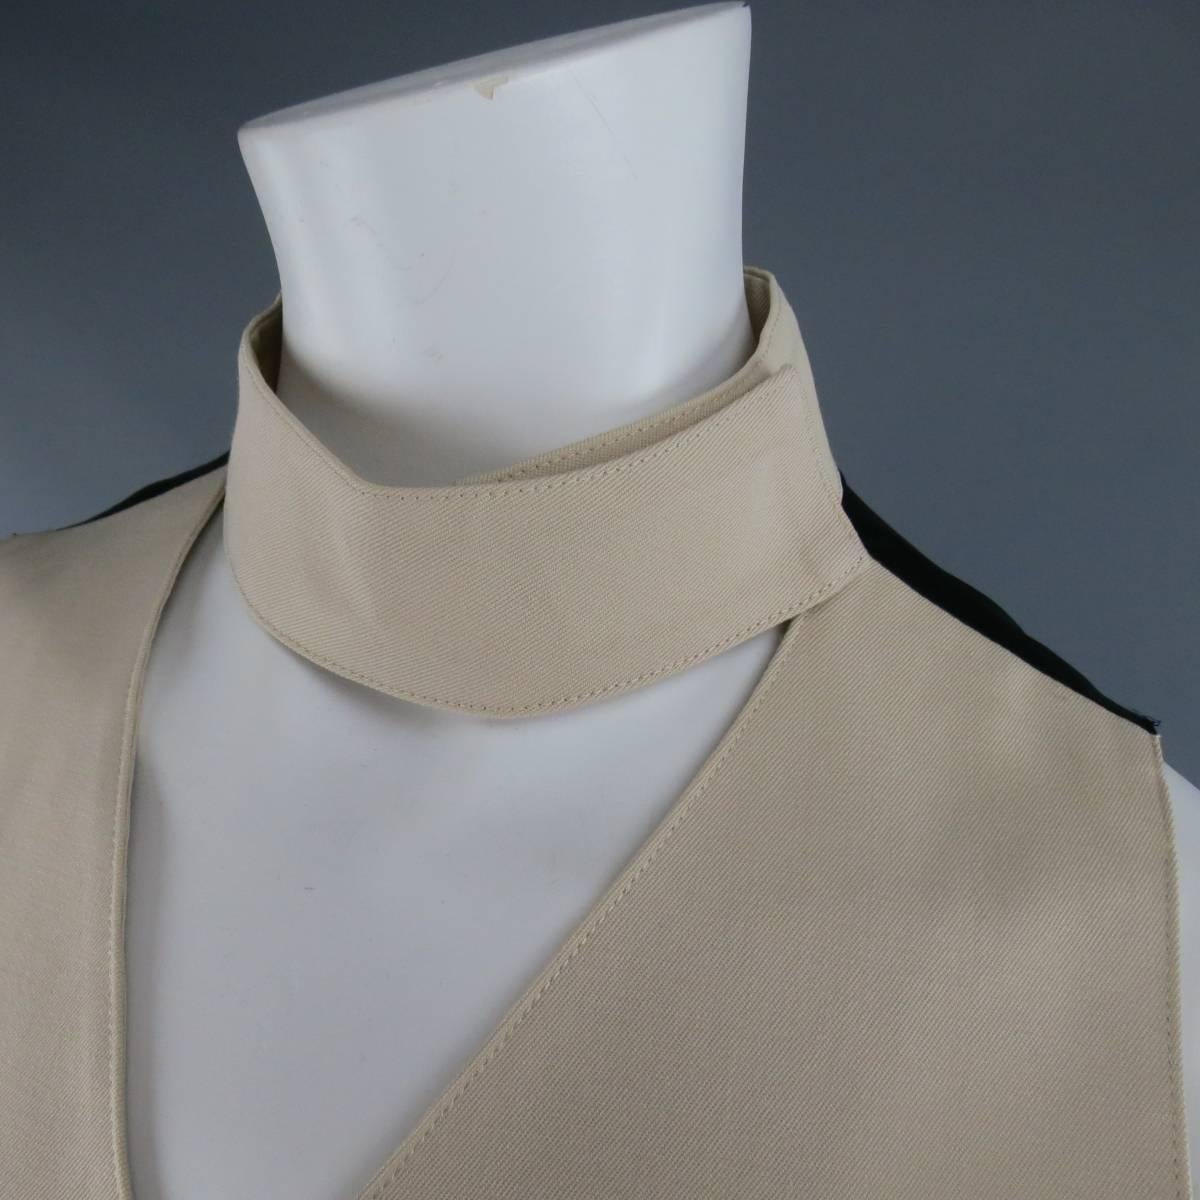 JUNIOR GAULTIER by JEAN PAUL GAULTIER beige wool vest features a velcro neck tab, v-neck cut with button closure, slit pockets, black panel with tab adjustment in the back. Made in Japan.
 
Good Pre-Owned Condition.
Marked: 40
 
Measurements:
